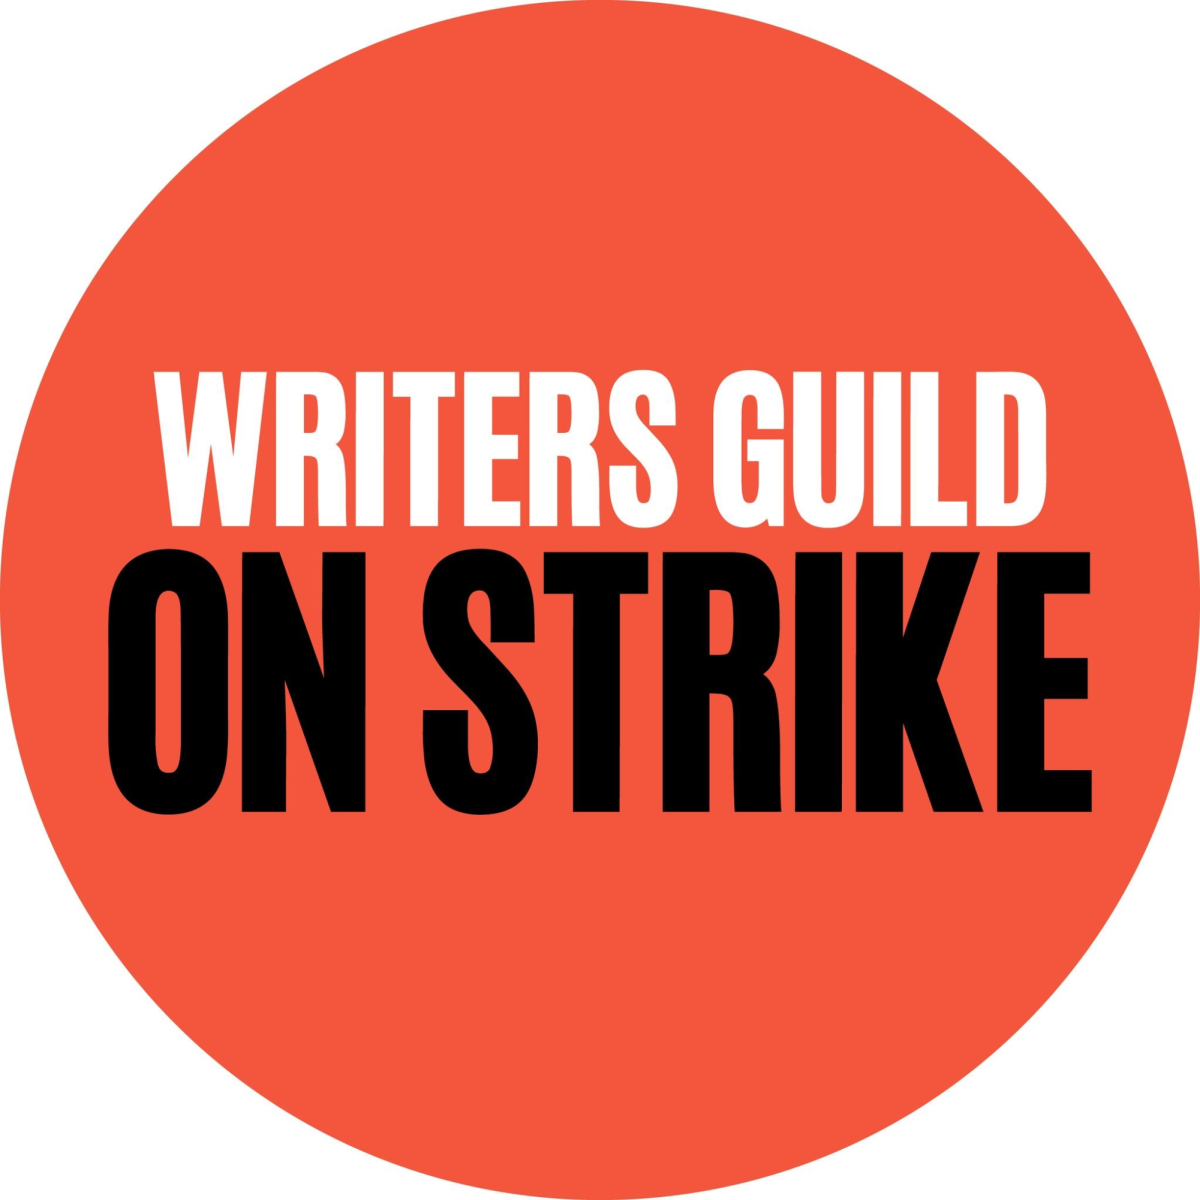 The+WGA+agreed+to+a+tentative+agreement+after+being+on+strike+since+May+2.